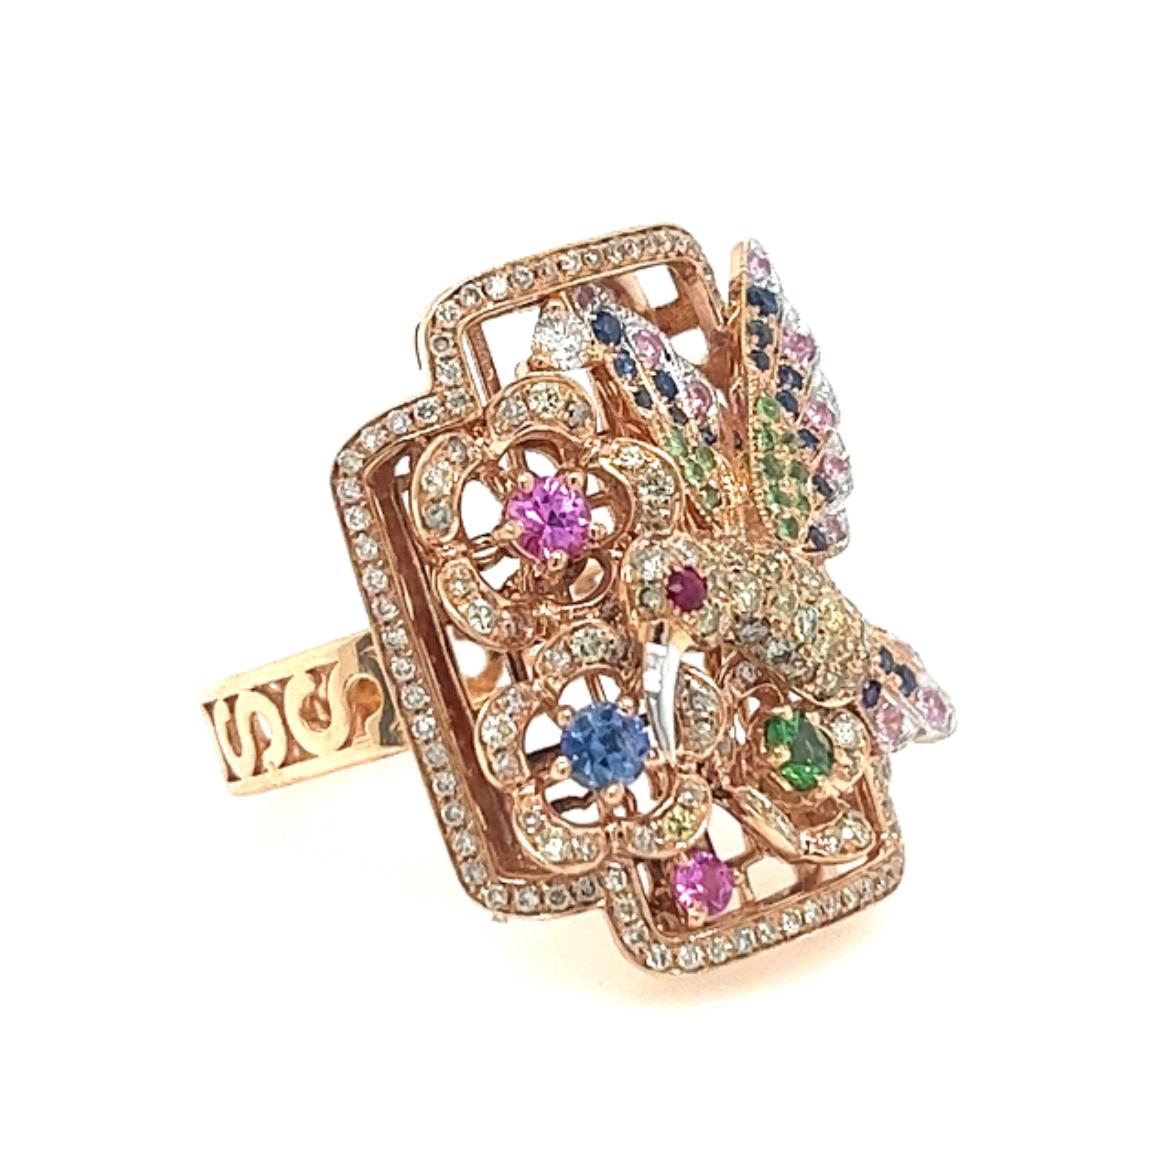 18K Rose Gold Multi-Color Sapphire Bird & Garden Ring with Diamonds

19 Blue Sapphires - 0.22 CT
158 Diamonds -  0.78 CT
13 Green Garnets - 0.17 CT
14 Pink Sapphires -  0.32 CT
1 Rubies - 0.02 CT
18K Rose Gold - 8.84 GM

This captivating ring